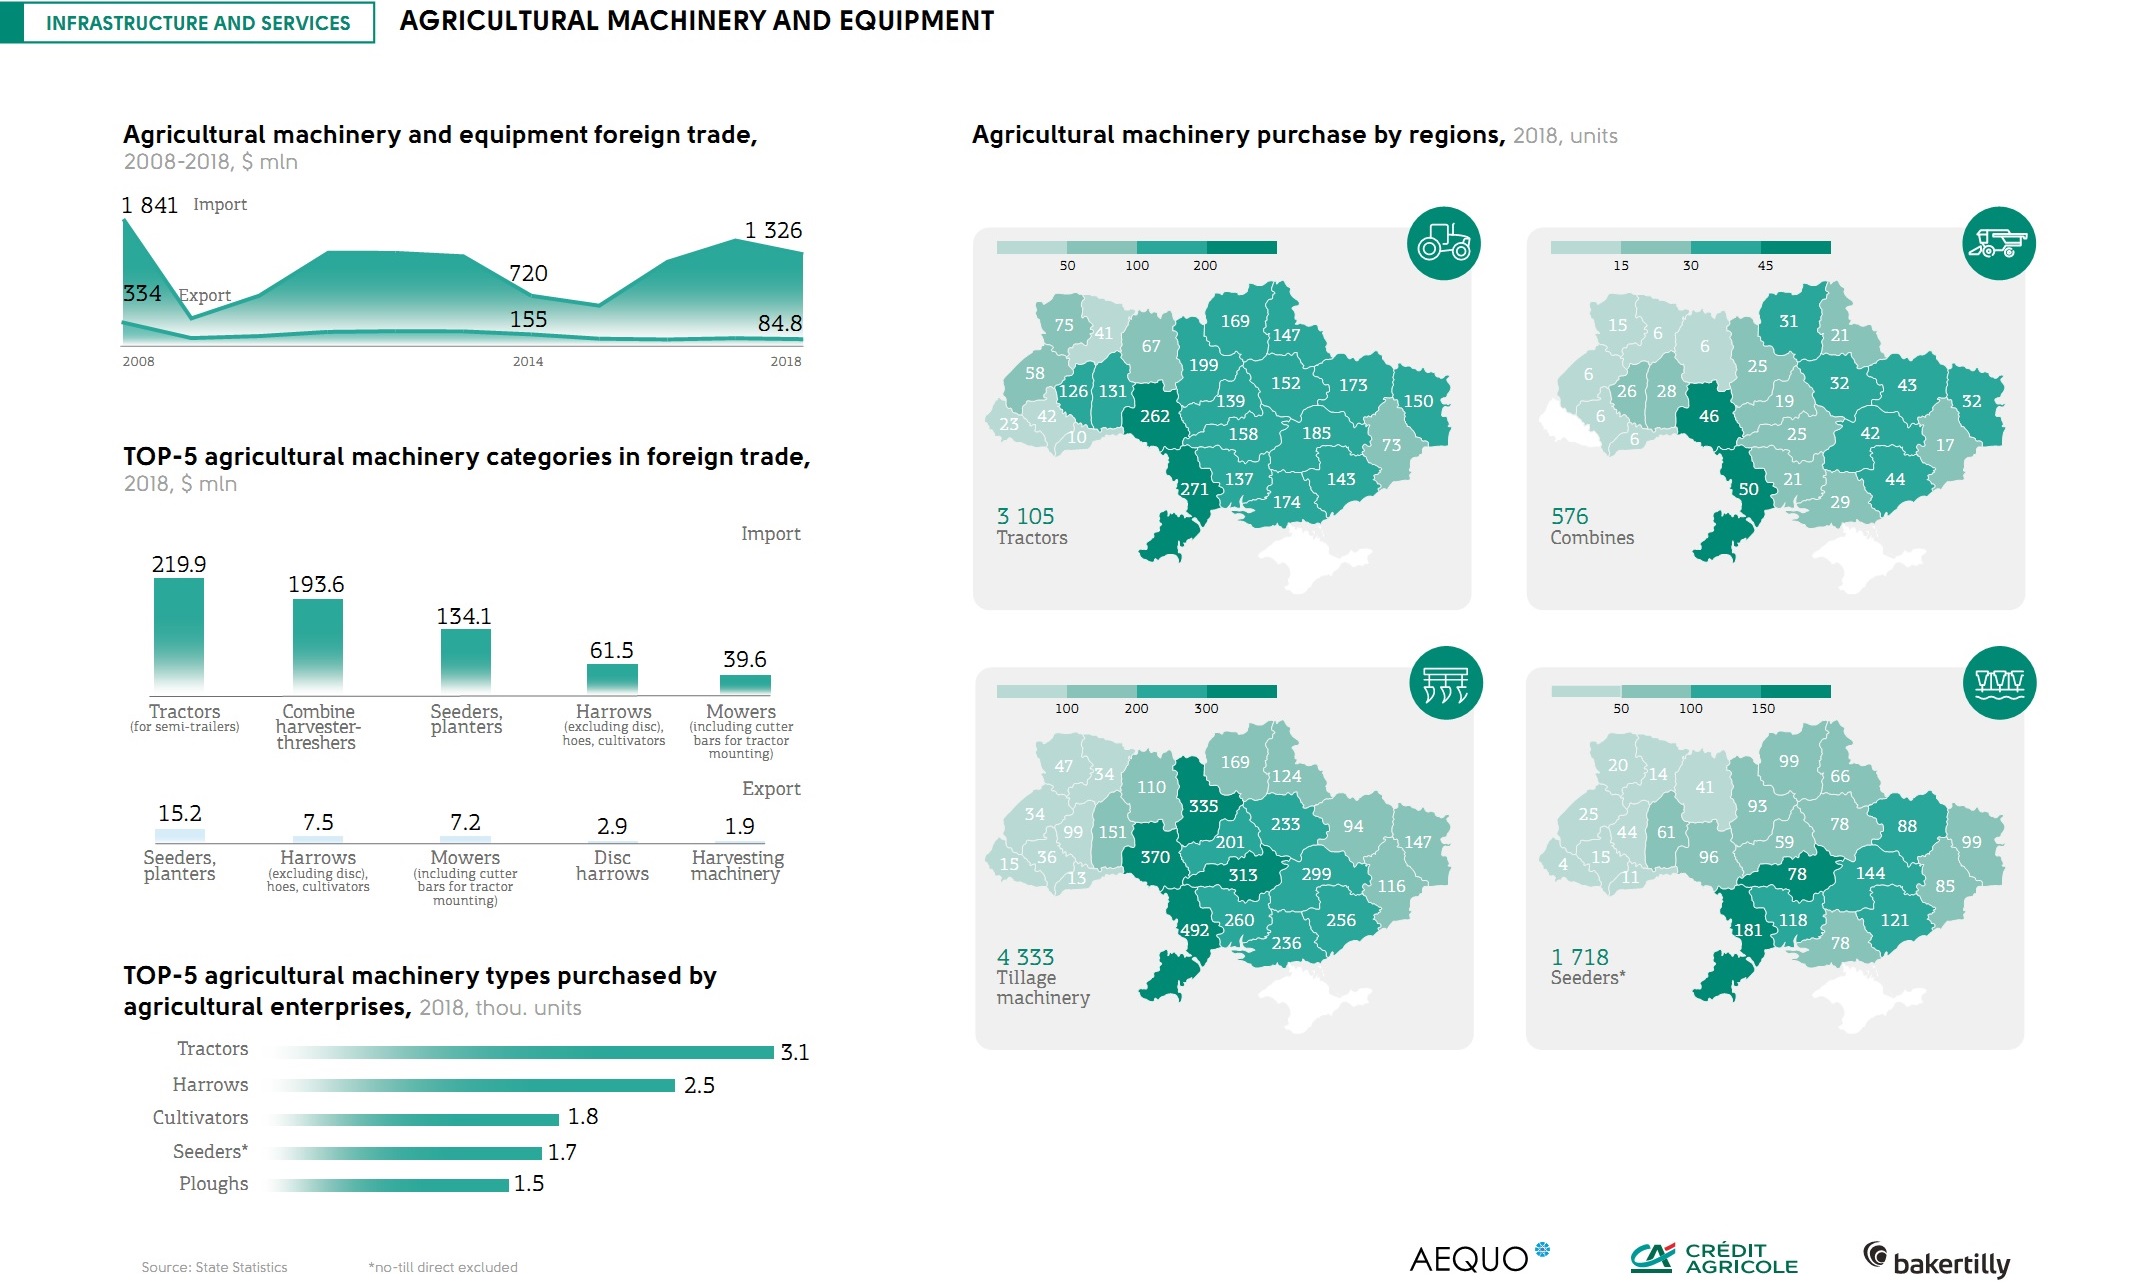 Agricultural machinery and equipment market in Ukraine (click for full resolution)